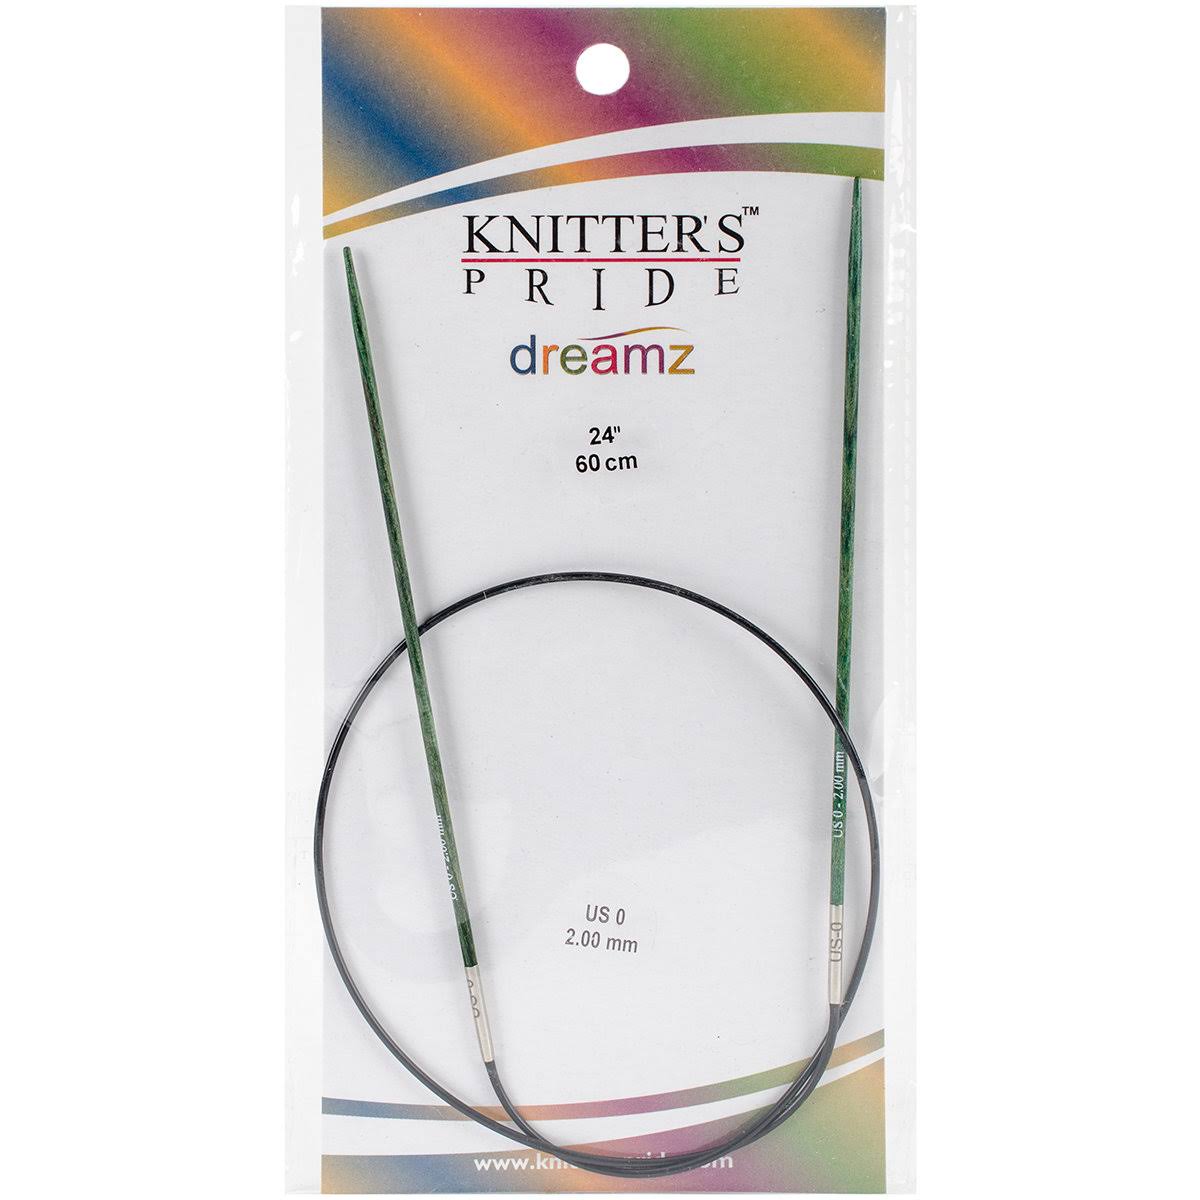 Knitter's Pride Dreamz Fixed Circular Needles - 0/2mm, 24", Size 0